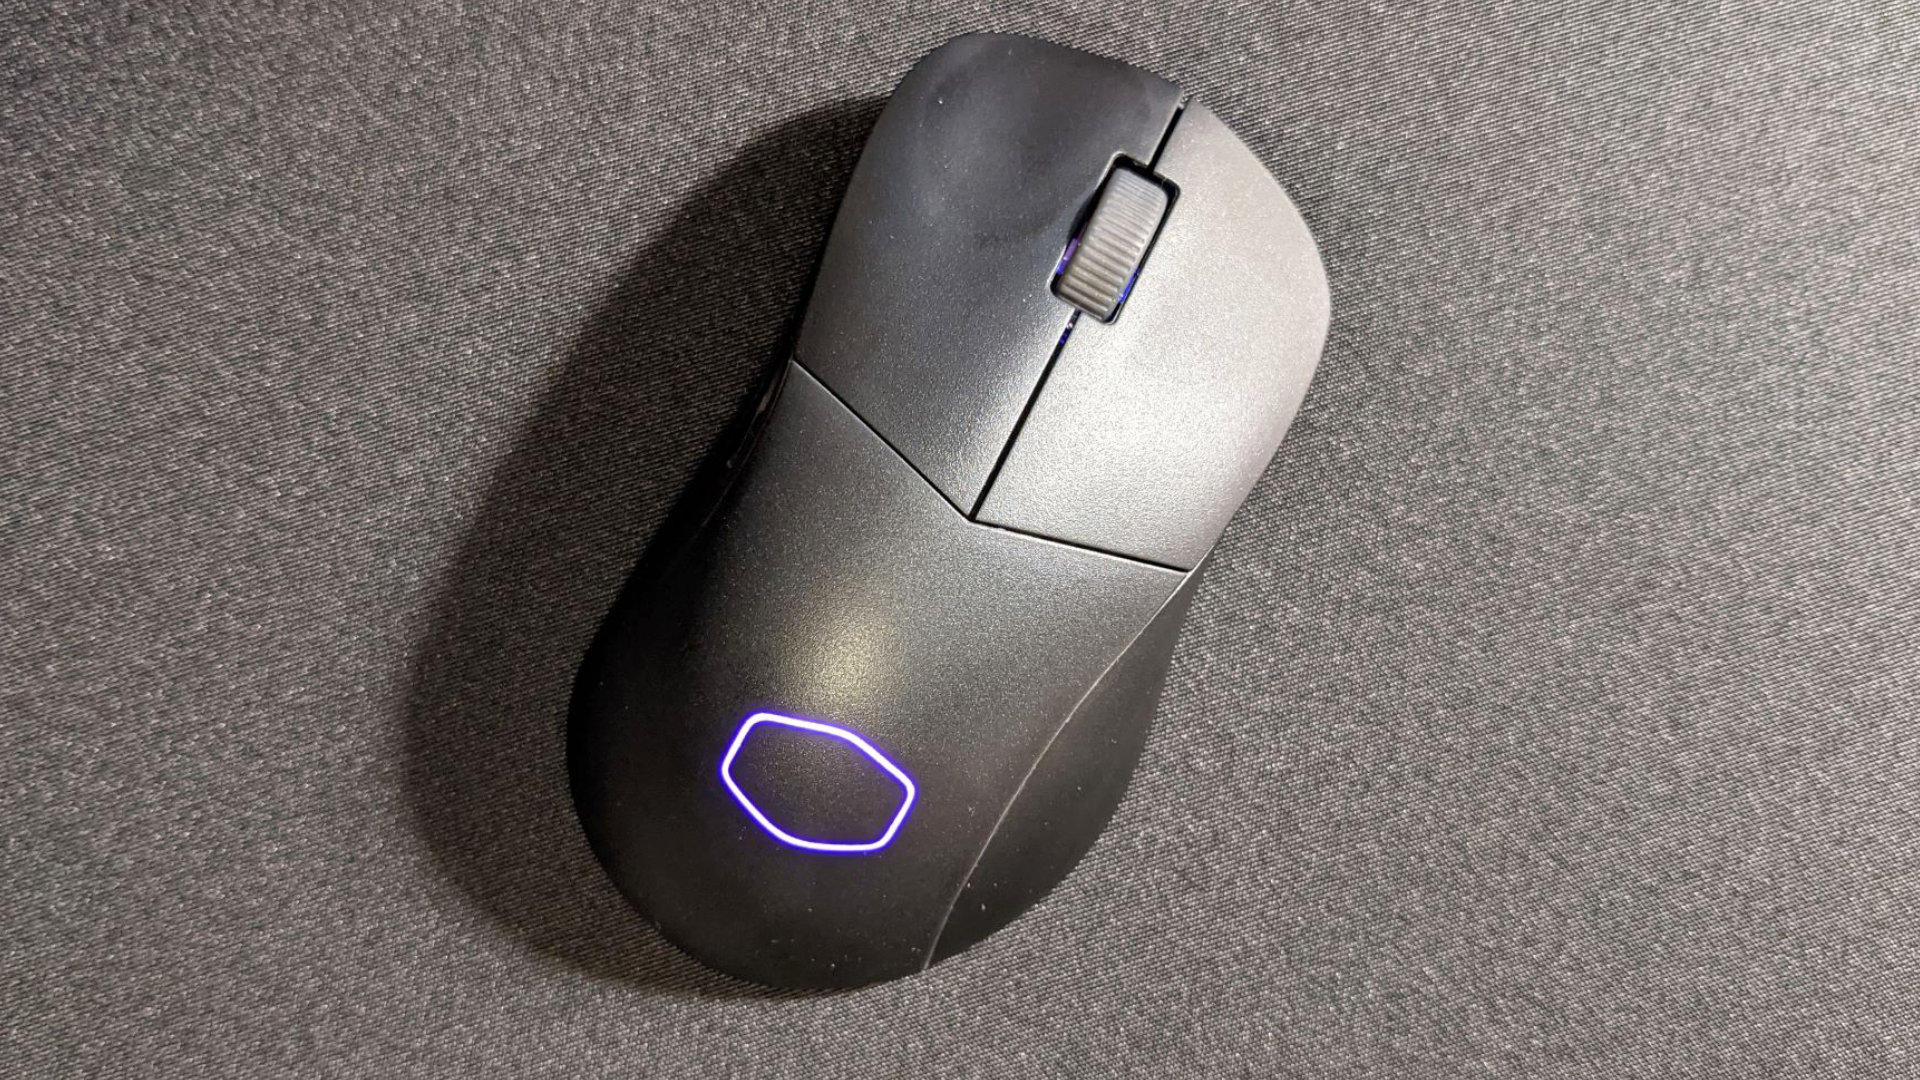 The best wireless gaming mouse 2023